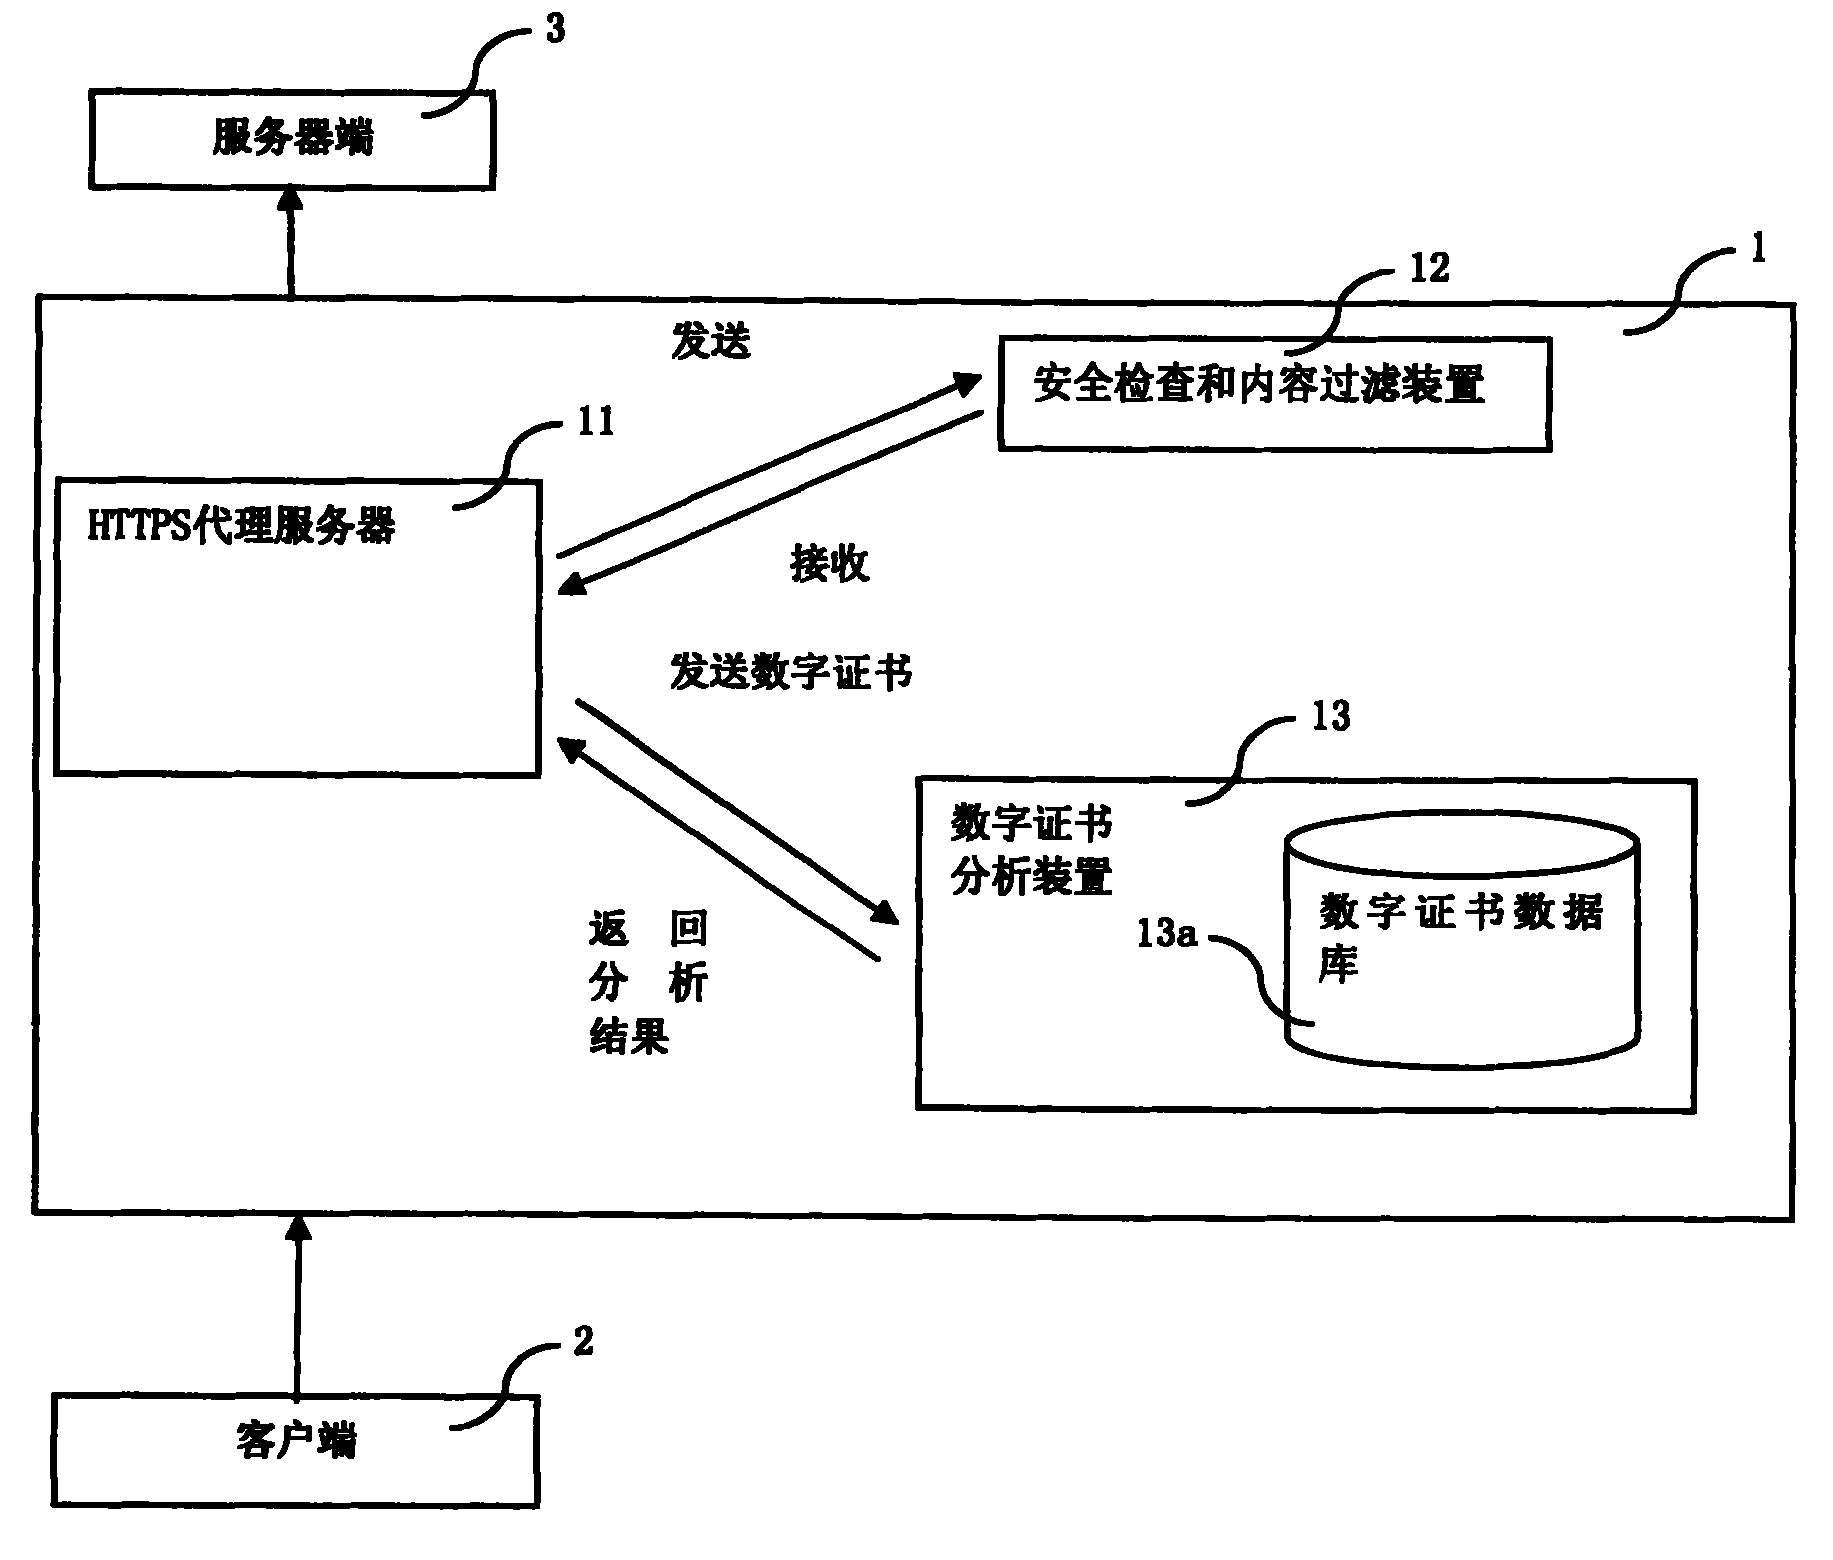 HTTPS communication tunnel safety examination and content filtering system and method